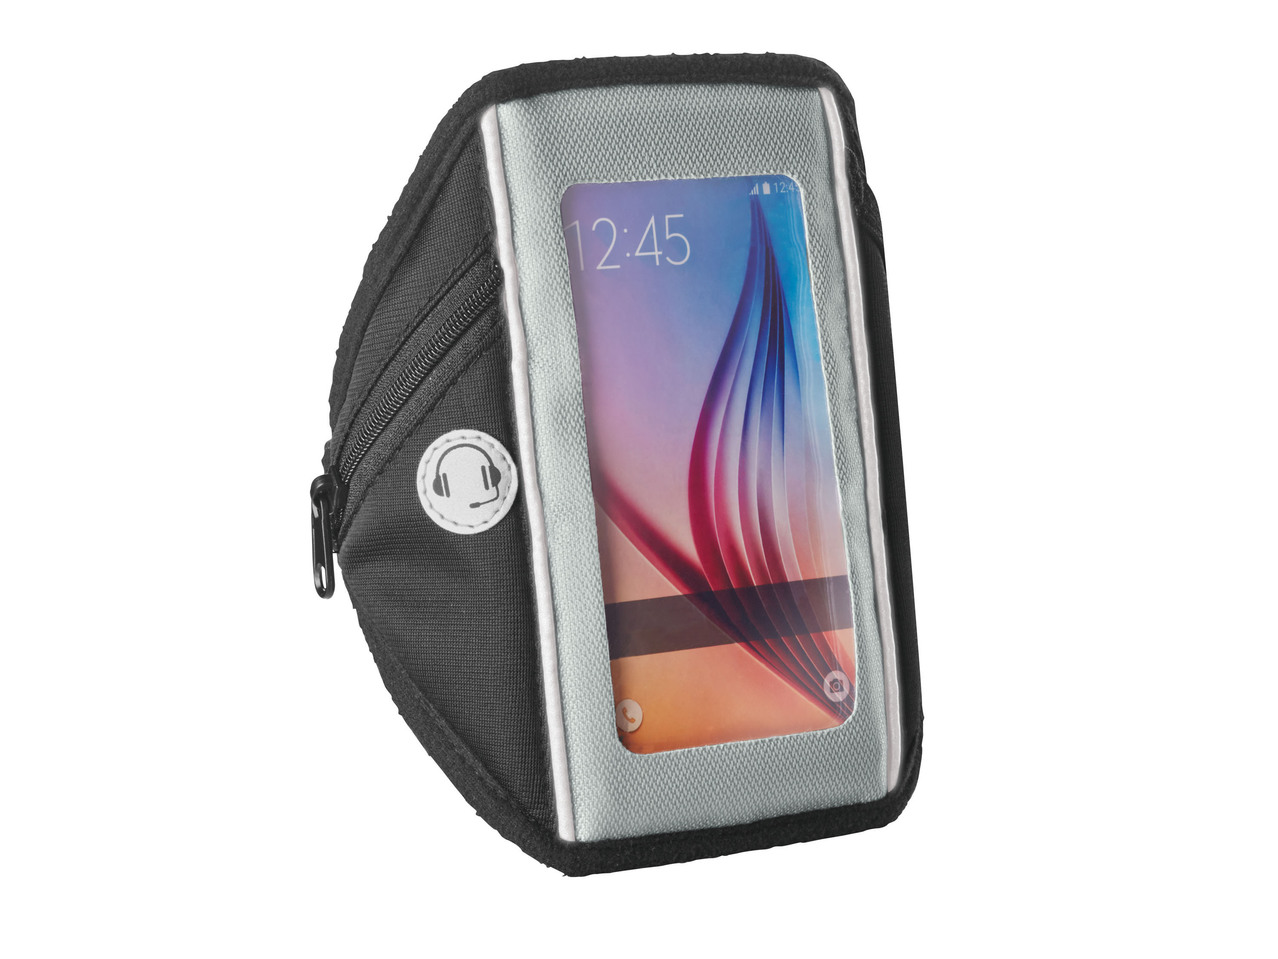 Arm Pouch for Smartphone or Wrist Pouch for Keys